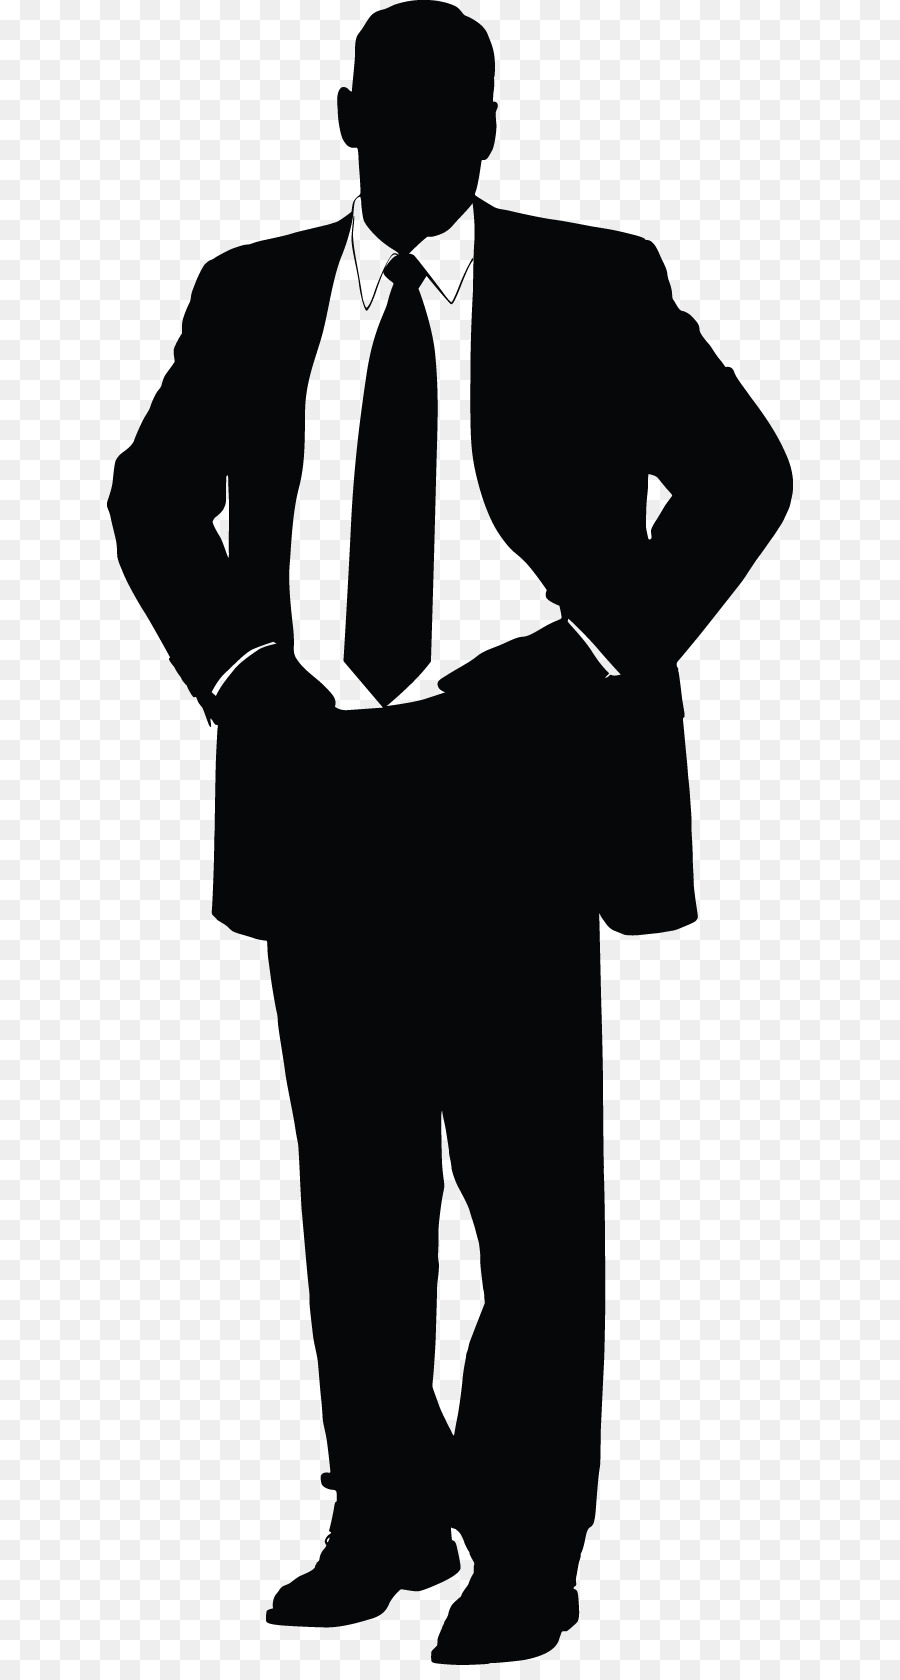 Businessperson Company Management Small business - man silhouette png download - 686*1665 - Free Transparent Business png Download.